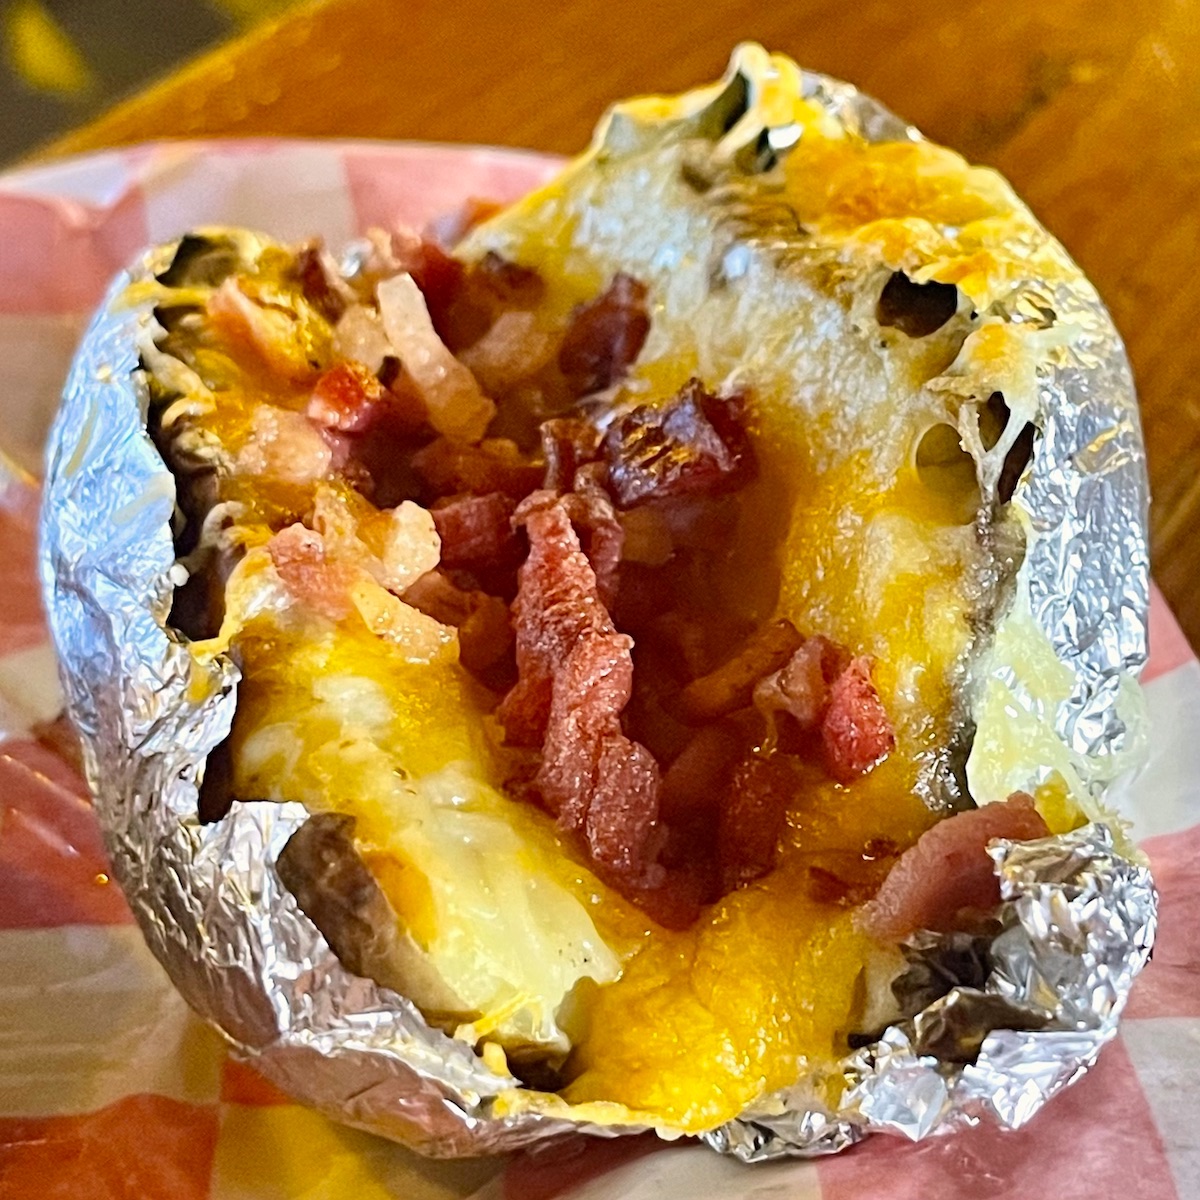 Fully Loaded Baked Potato from Shorty's BBQ in Miami, Florida